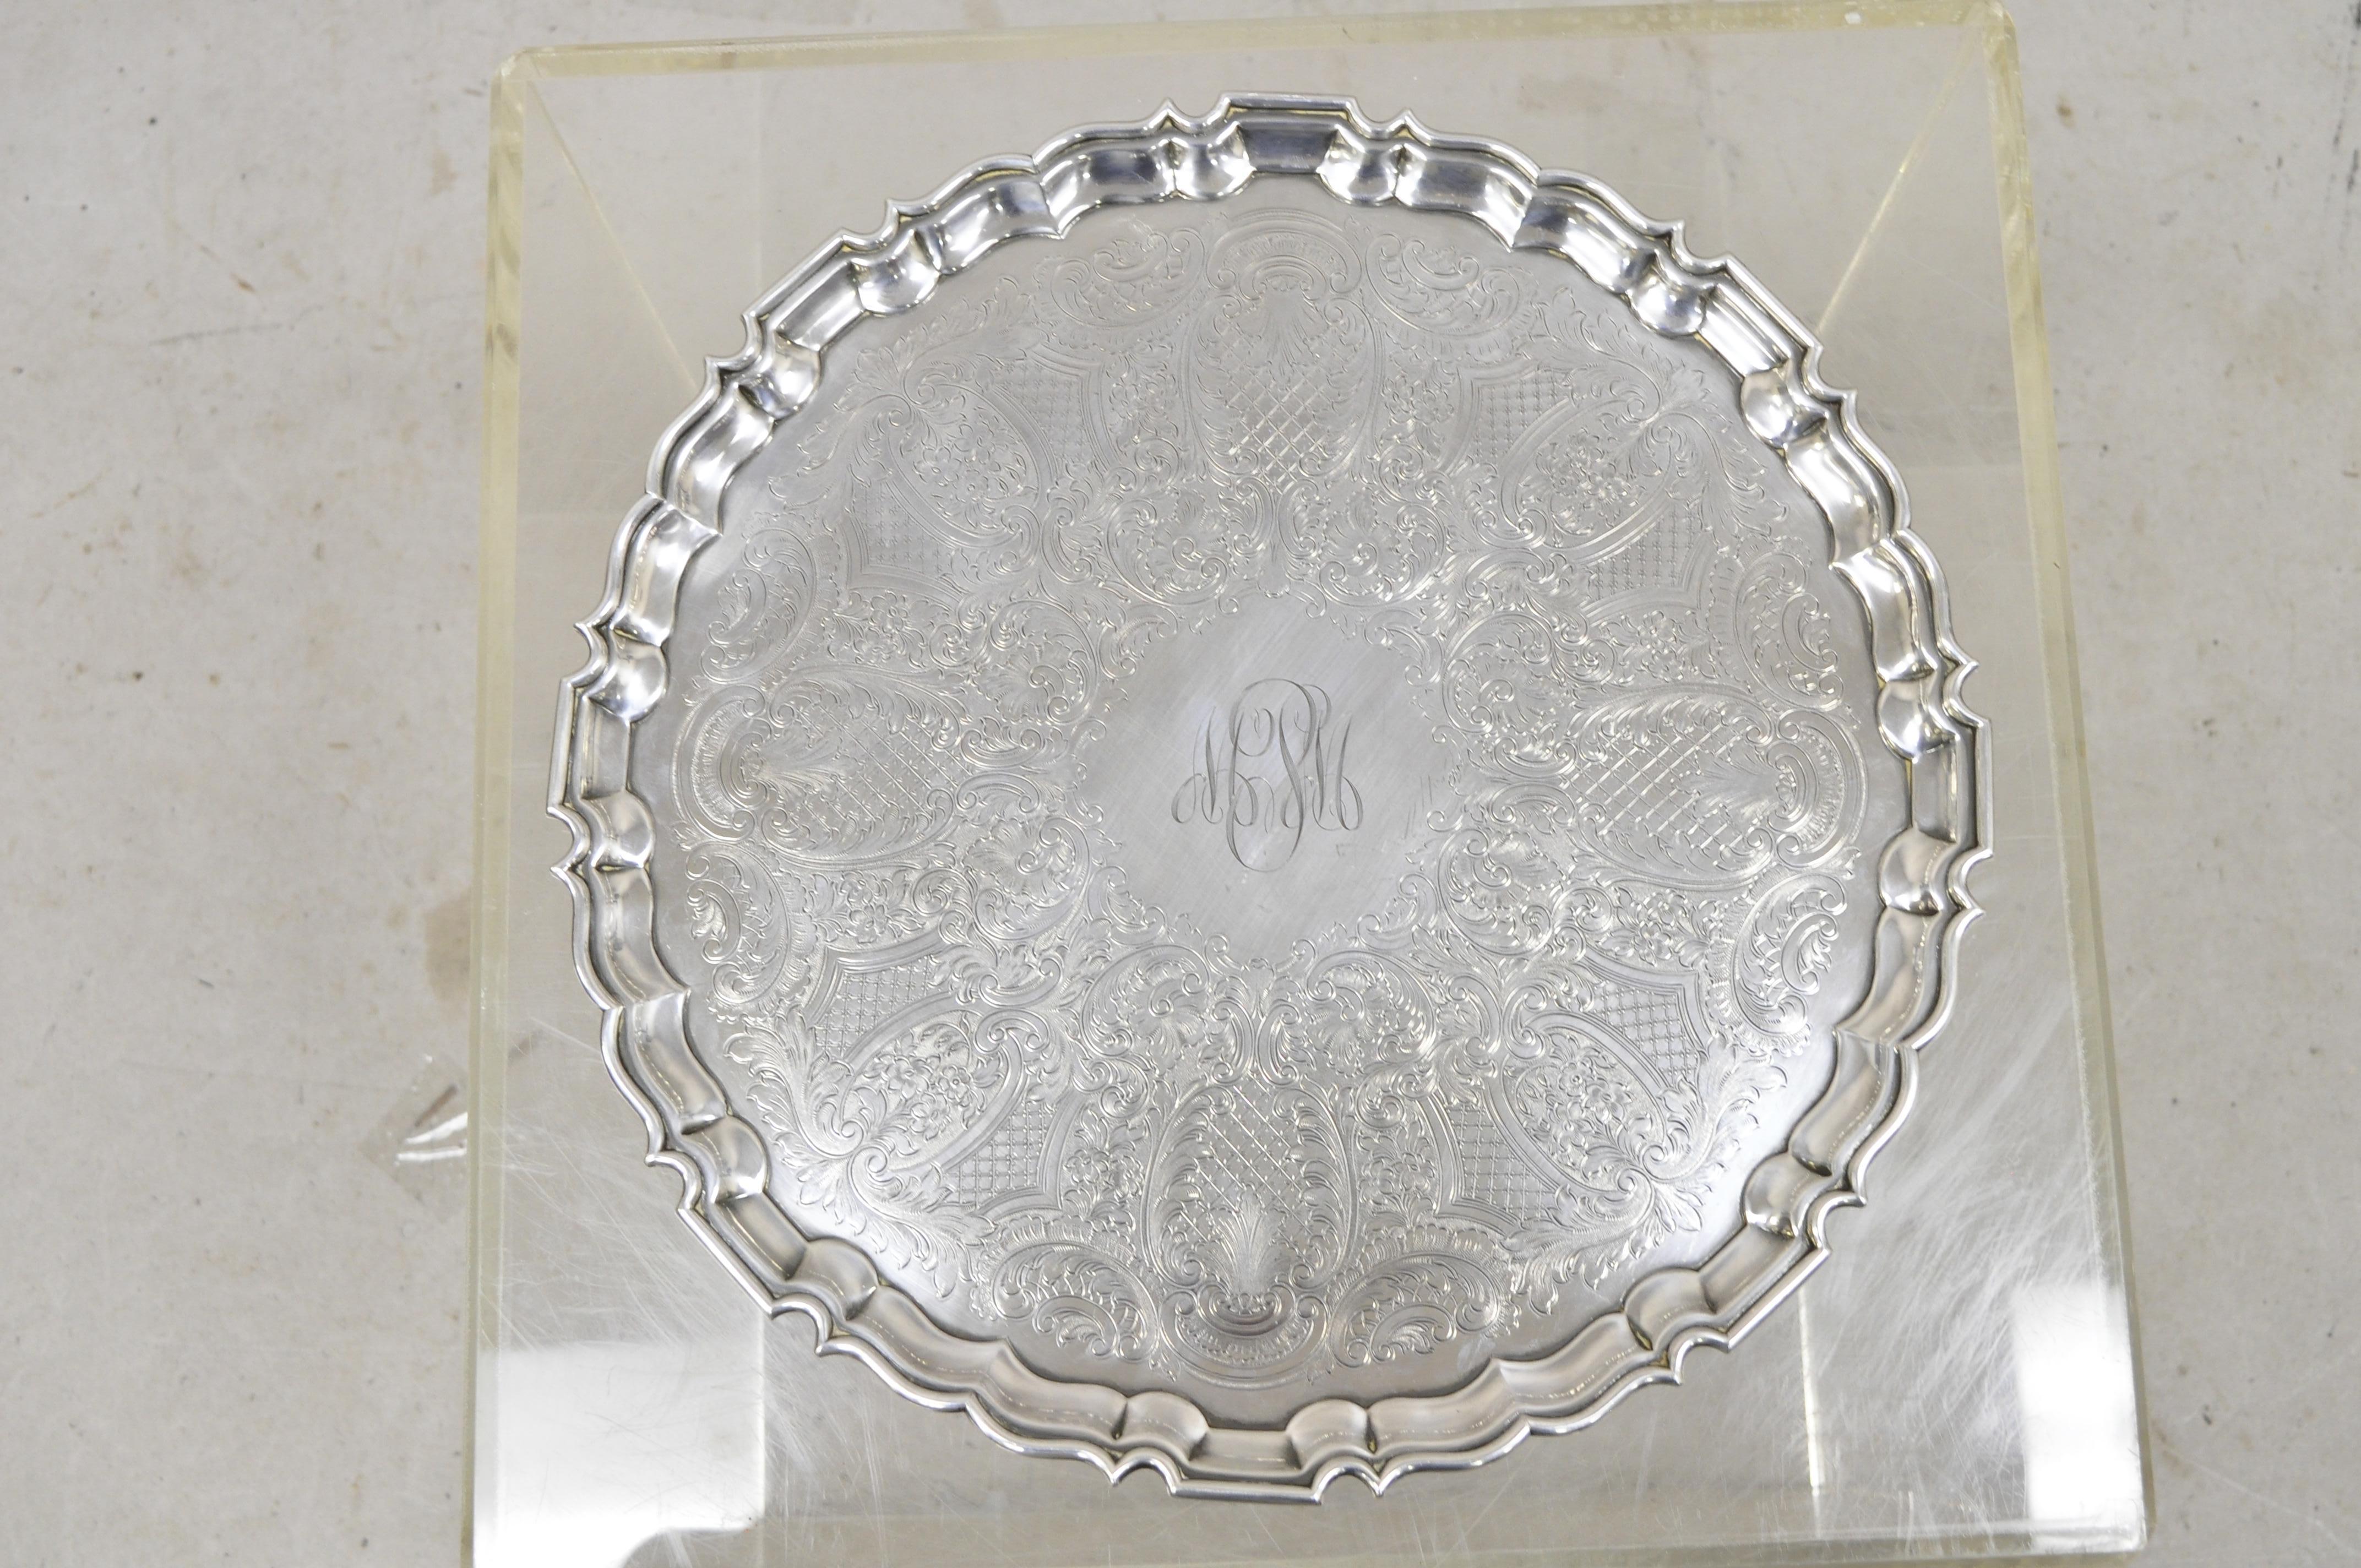 Antique Regency Silver Plate Scalloped Edge Floral Scrollwork Platter Tray In Good Condition For Sale In Philadelphia, PA